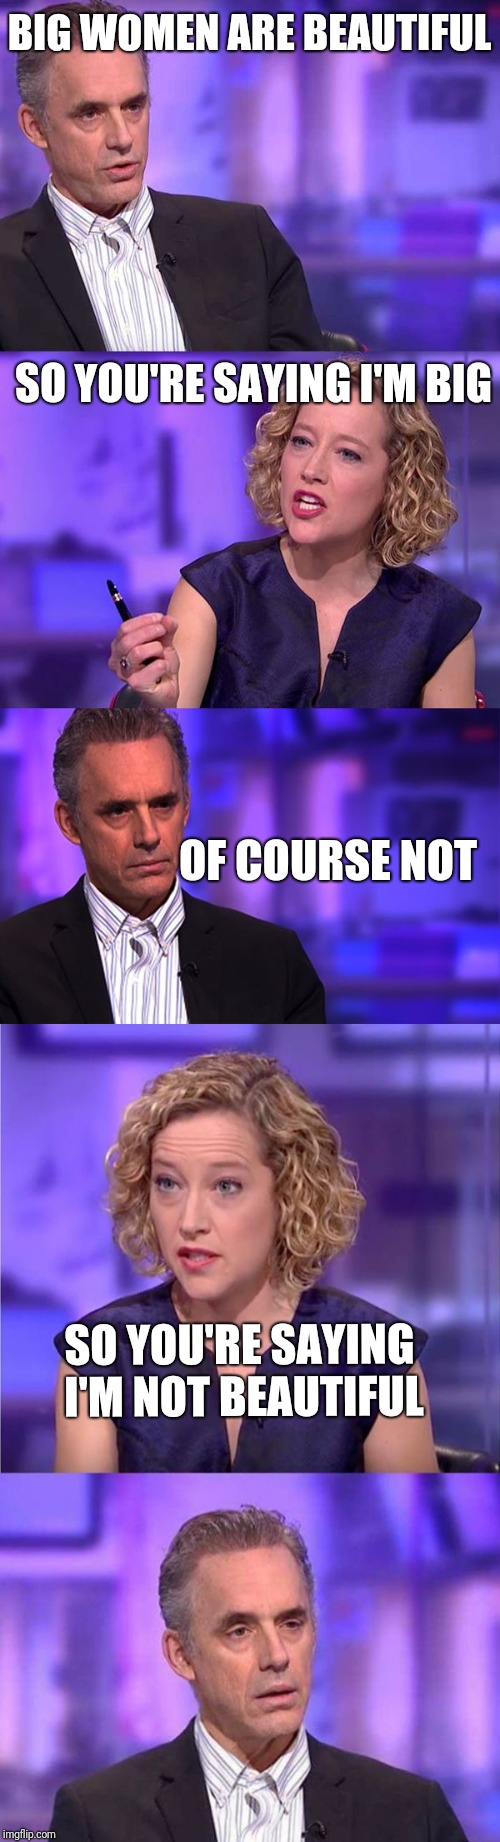 BIG WOMEN ARE BEAUTIFUL; SO YOU'RE SAYING I'M BIG; OF COURSE NOT; SO YOU'RE SAYING I'M NOT BEAUTIFUL | image tagged in jordan peterson interview channel 4,so you're saying jordan peterson | made w/ Imgflip meme maker